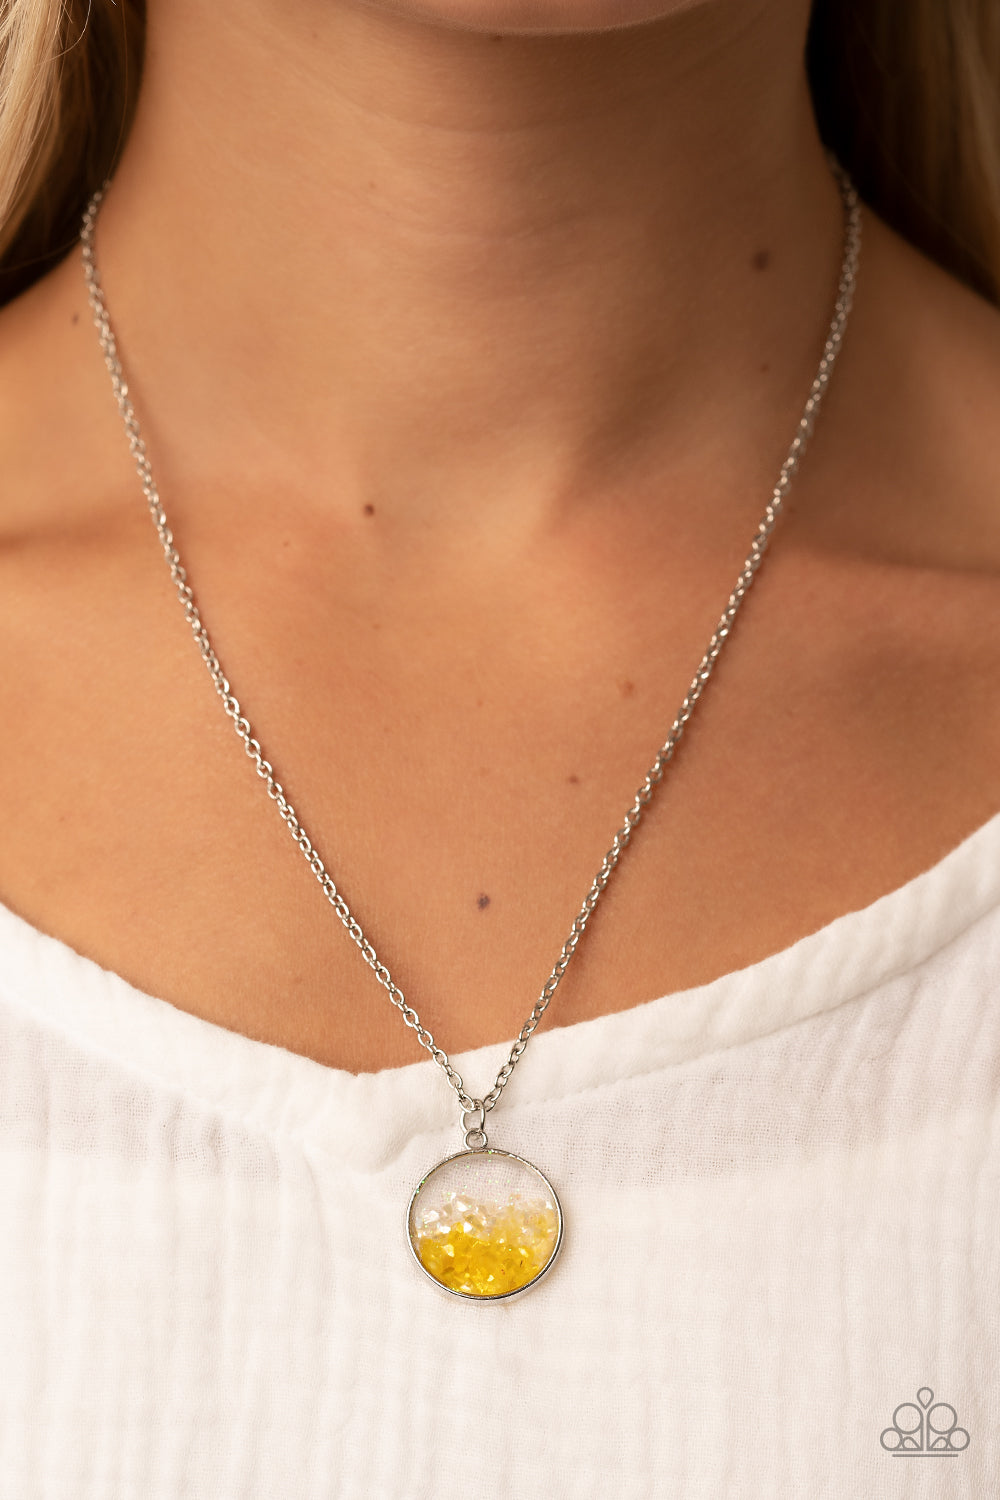 Completely Crushed - Yellow - Paparazzi Necklace